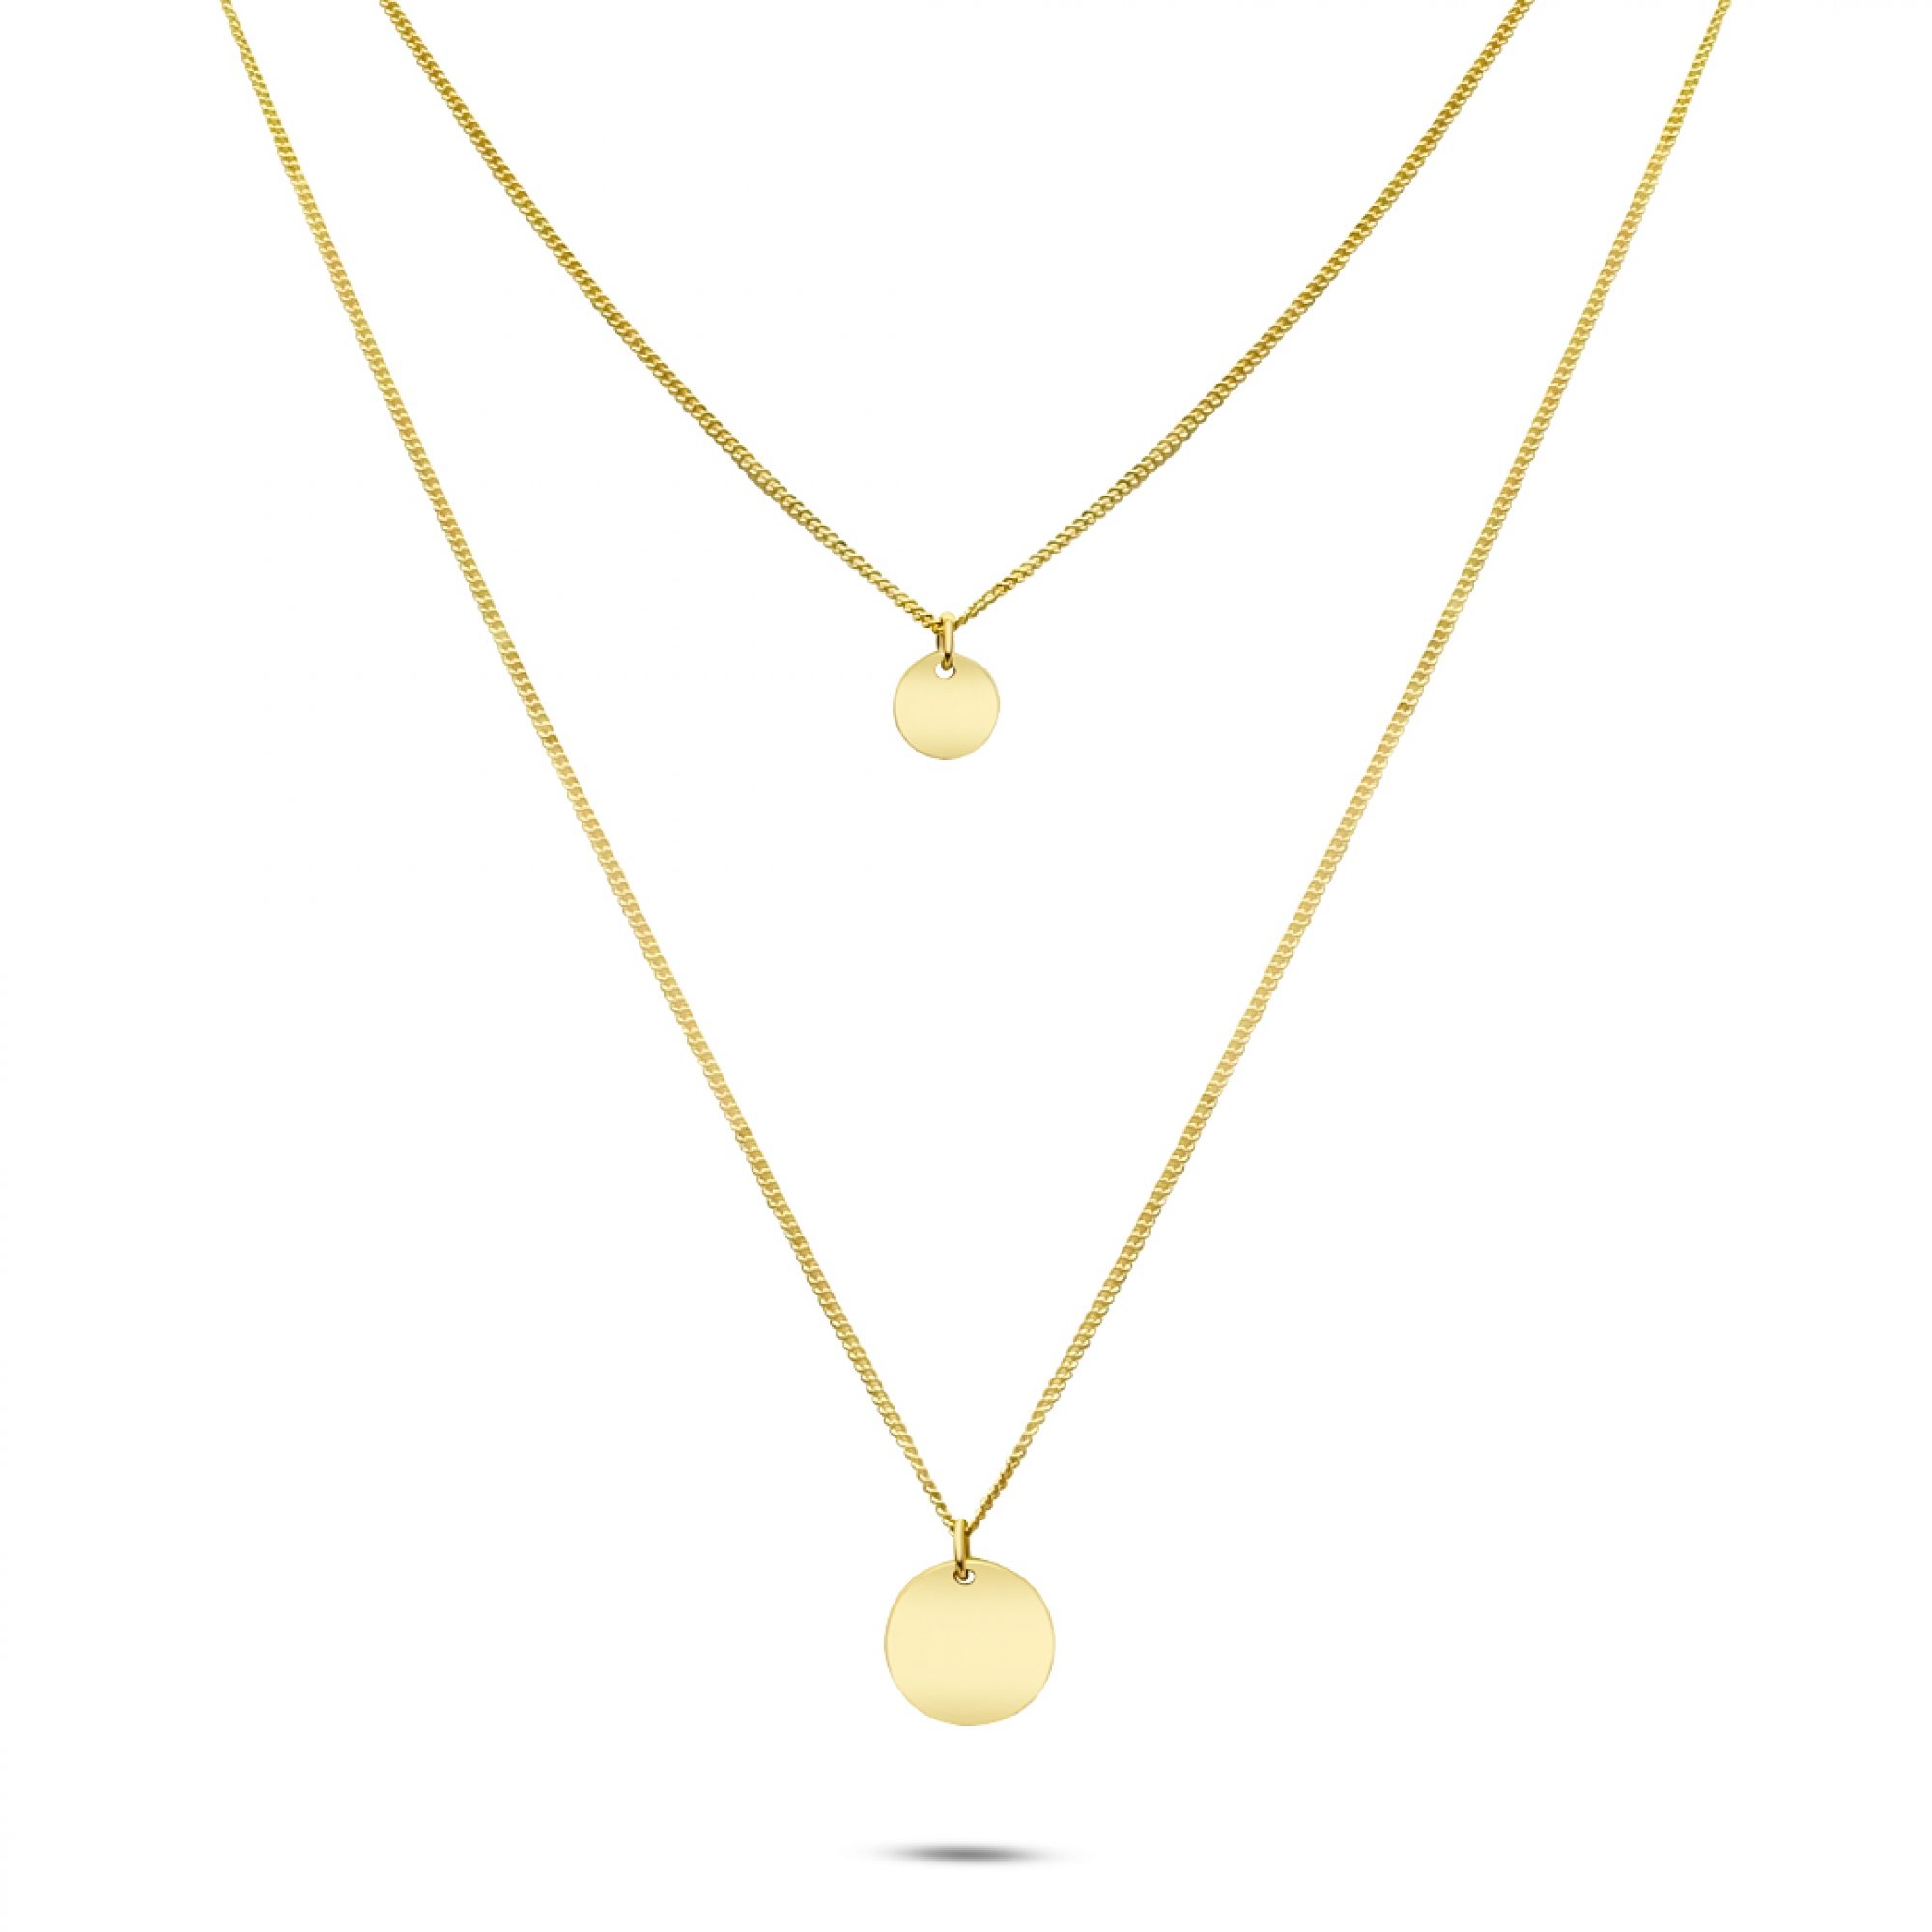 Double gold plated necklace